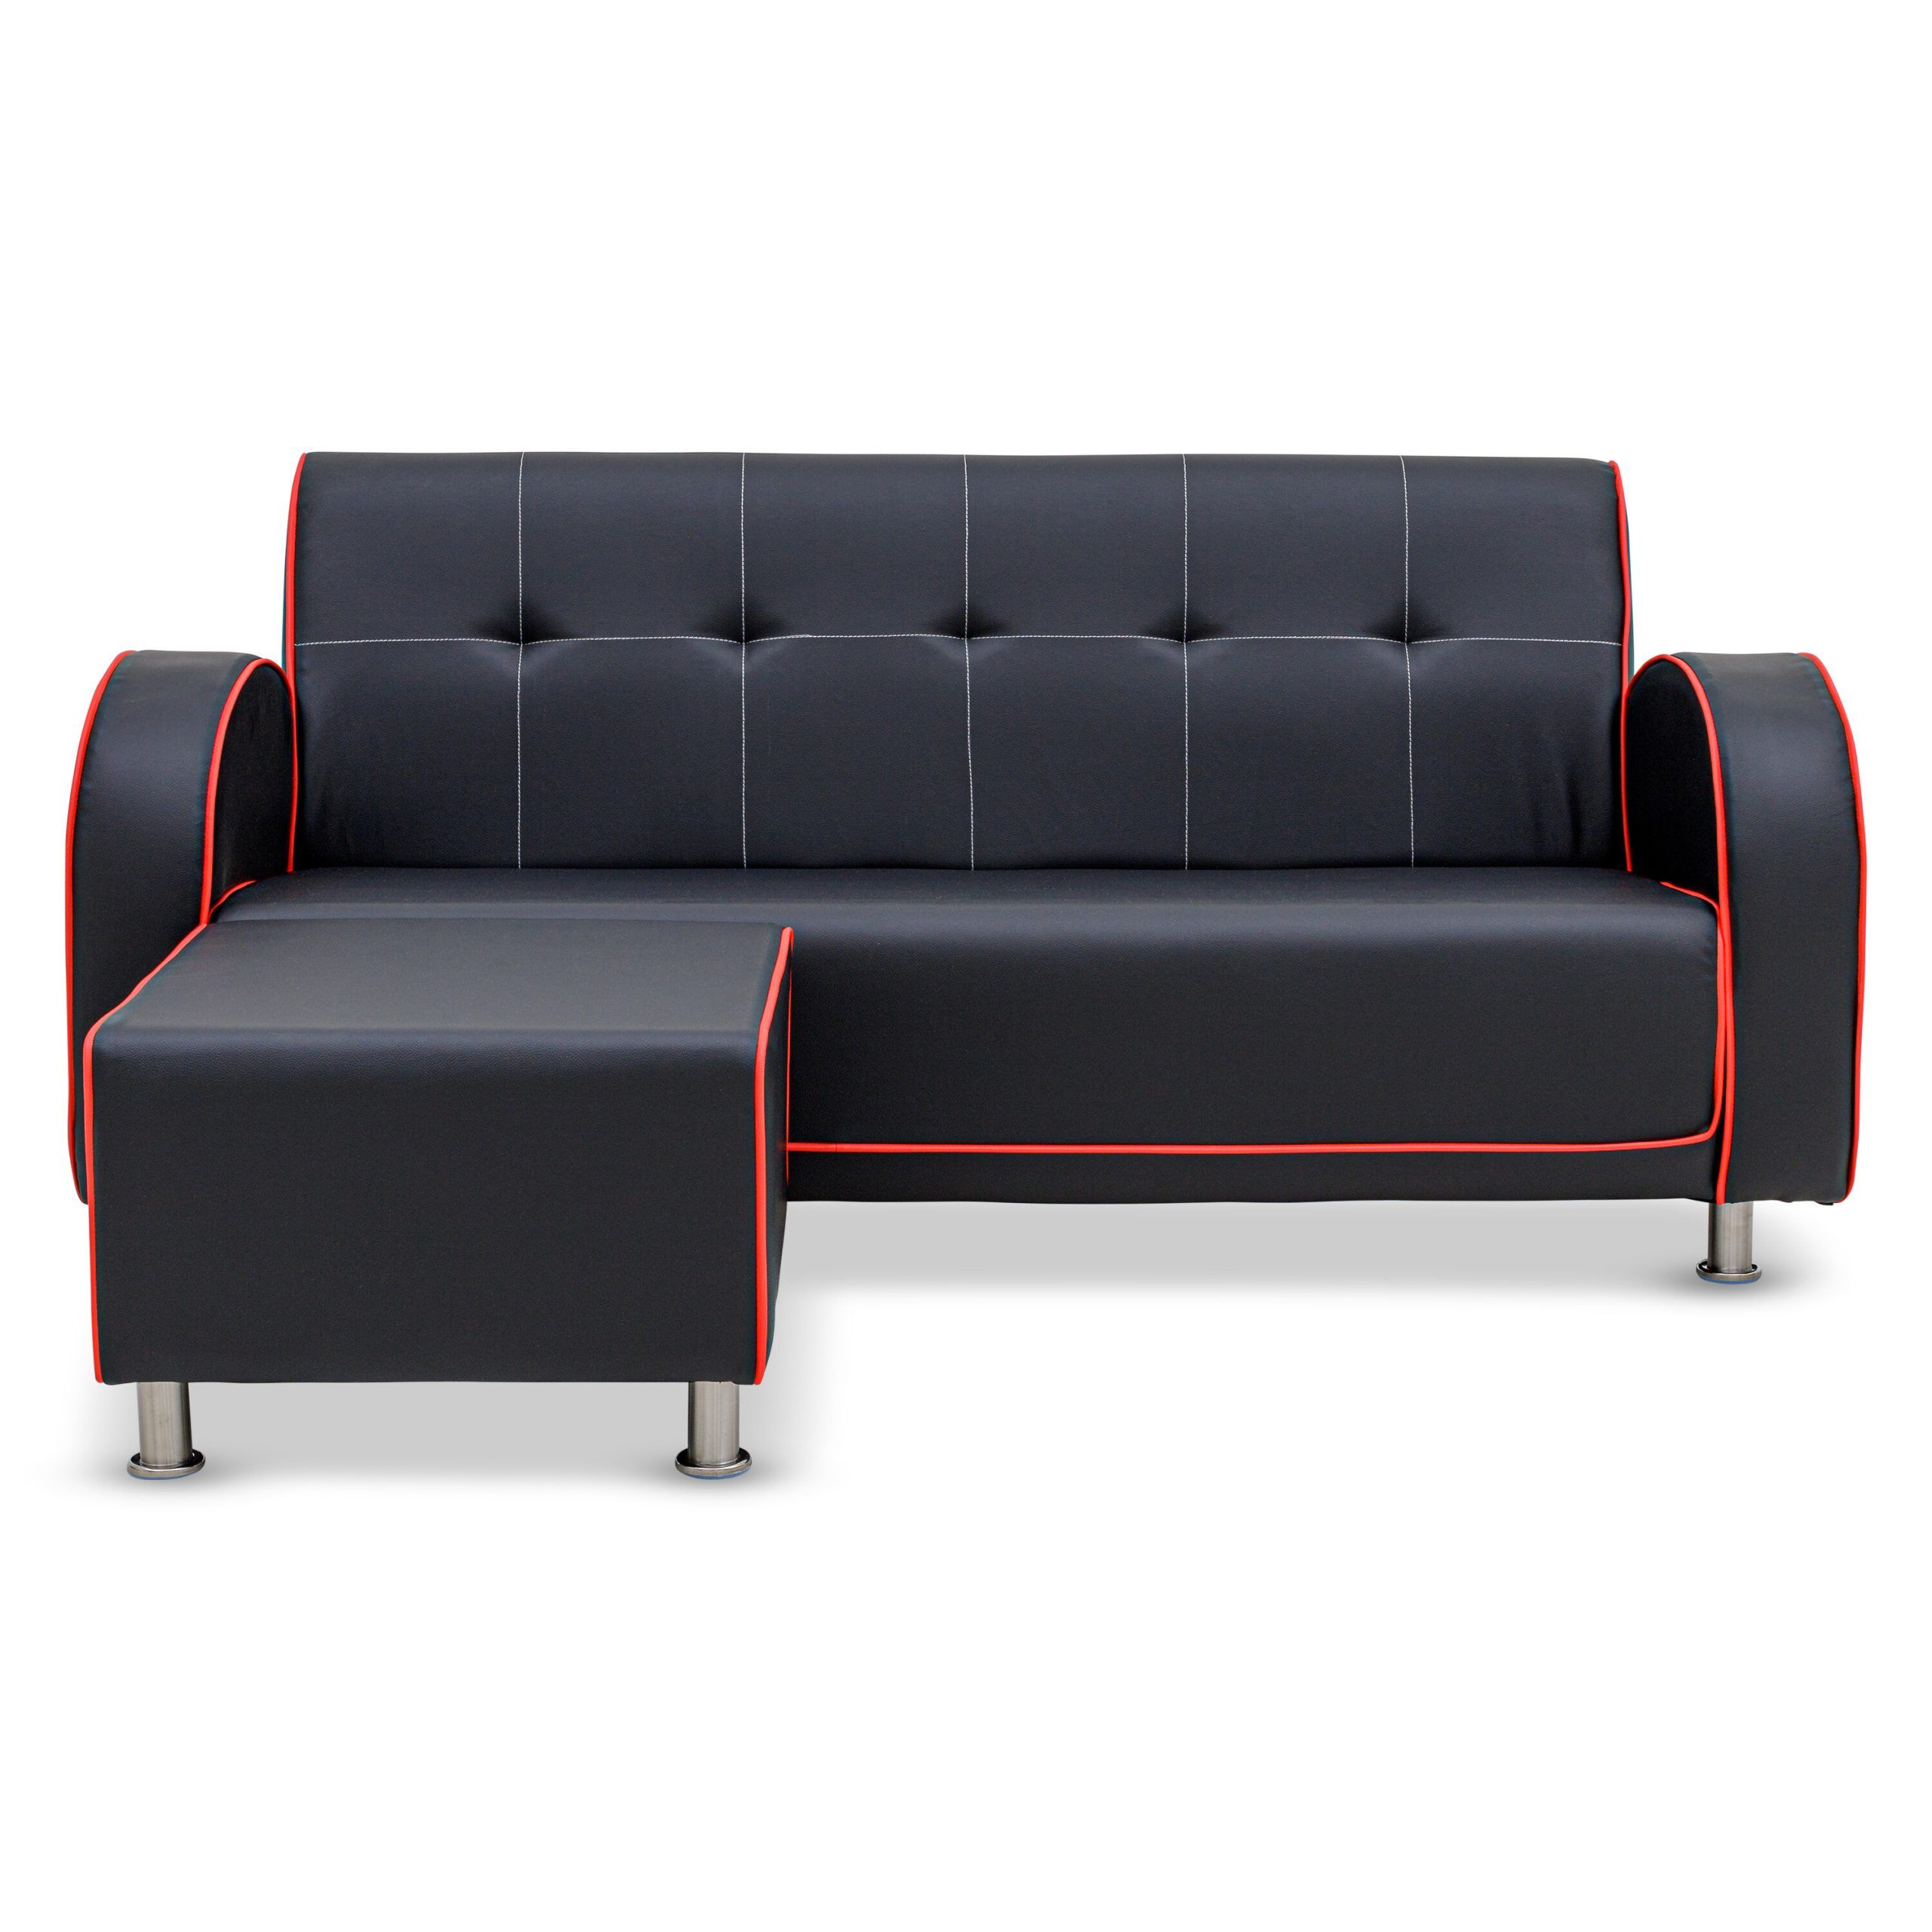 Lava 3 Seater Faux Leather Sofa With Ottoman | Furniture & Home Décor |  Fortytwo Intended For 3 Seat L Shaped Sofas In Black (Photo 10 of 15)